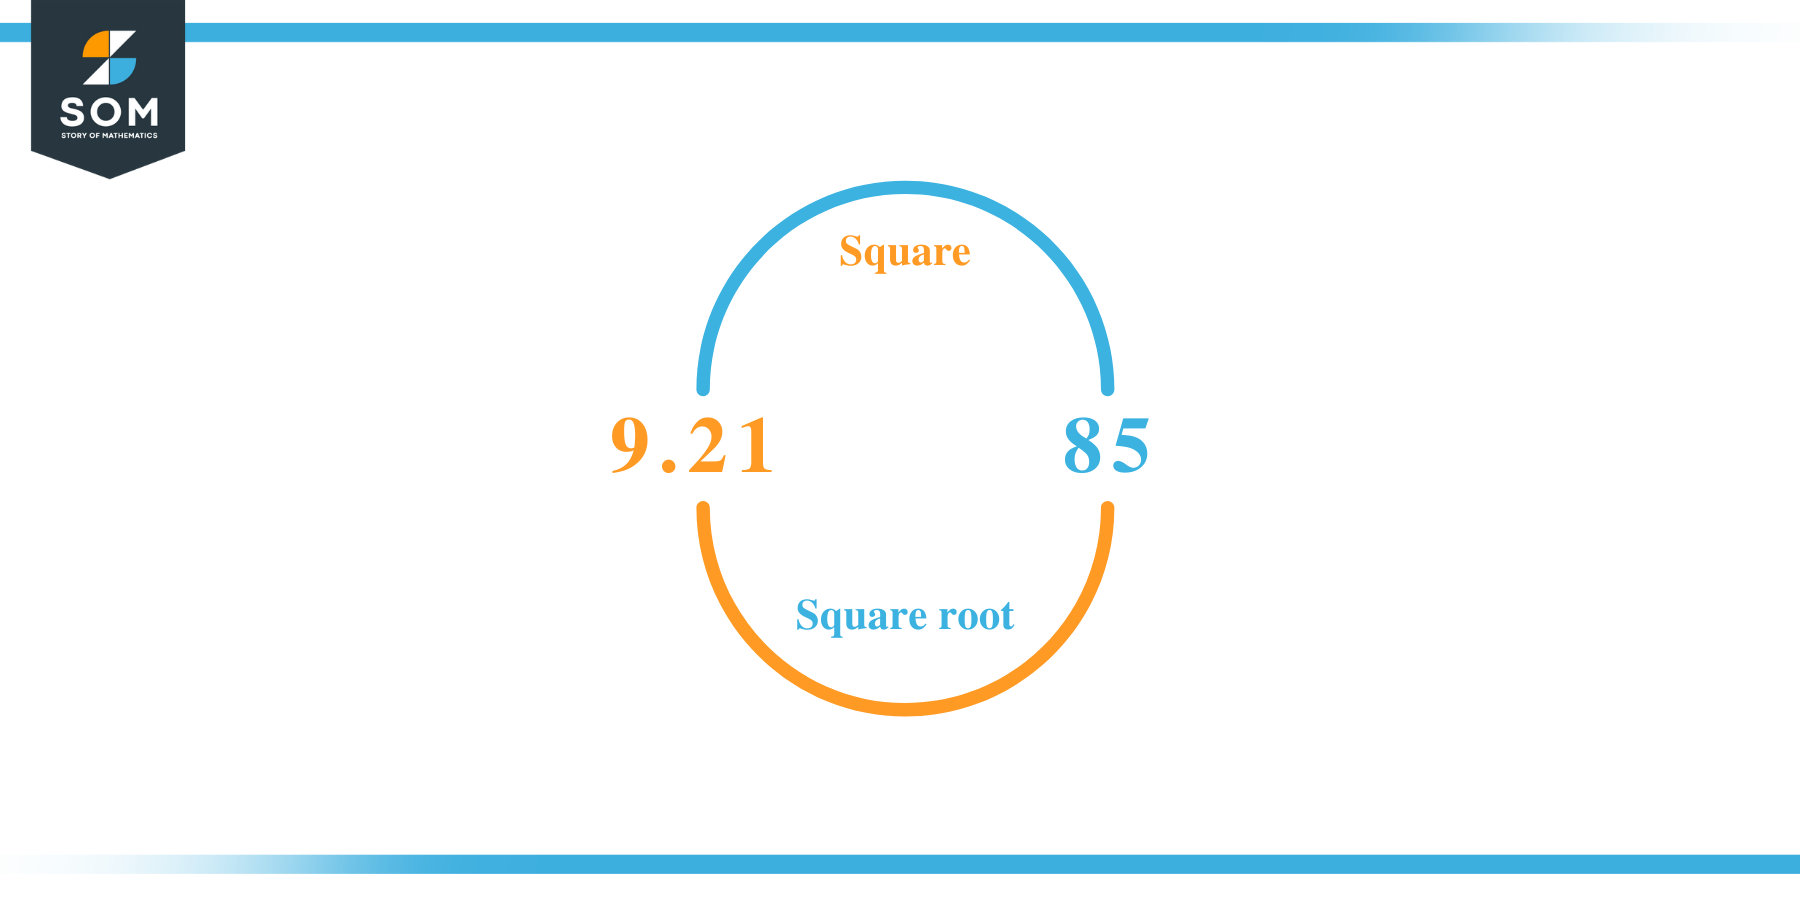 Square root of 85 Approximation Method